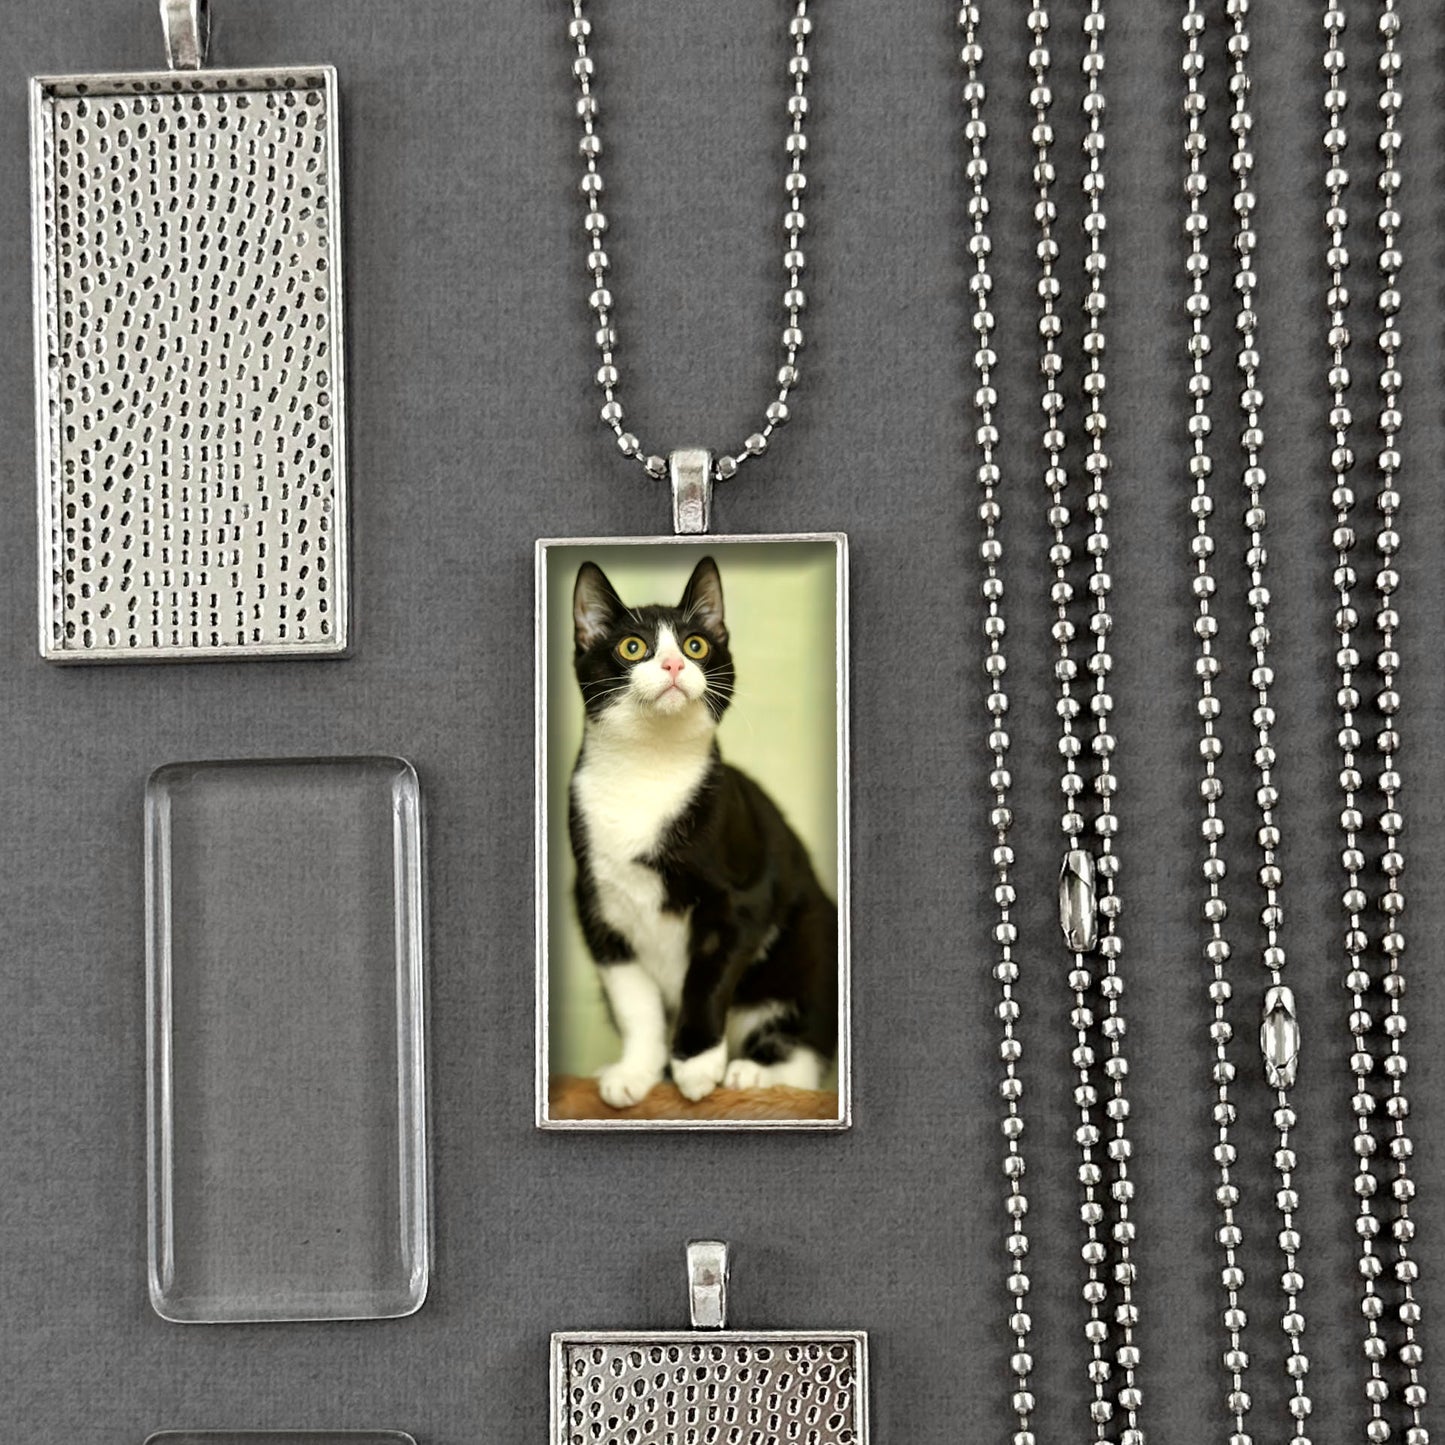 Mega Kit Photo Necklaces Rectangle 50x25mm with Ball Chains Antique Silver Makes 10 Kit